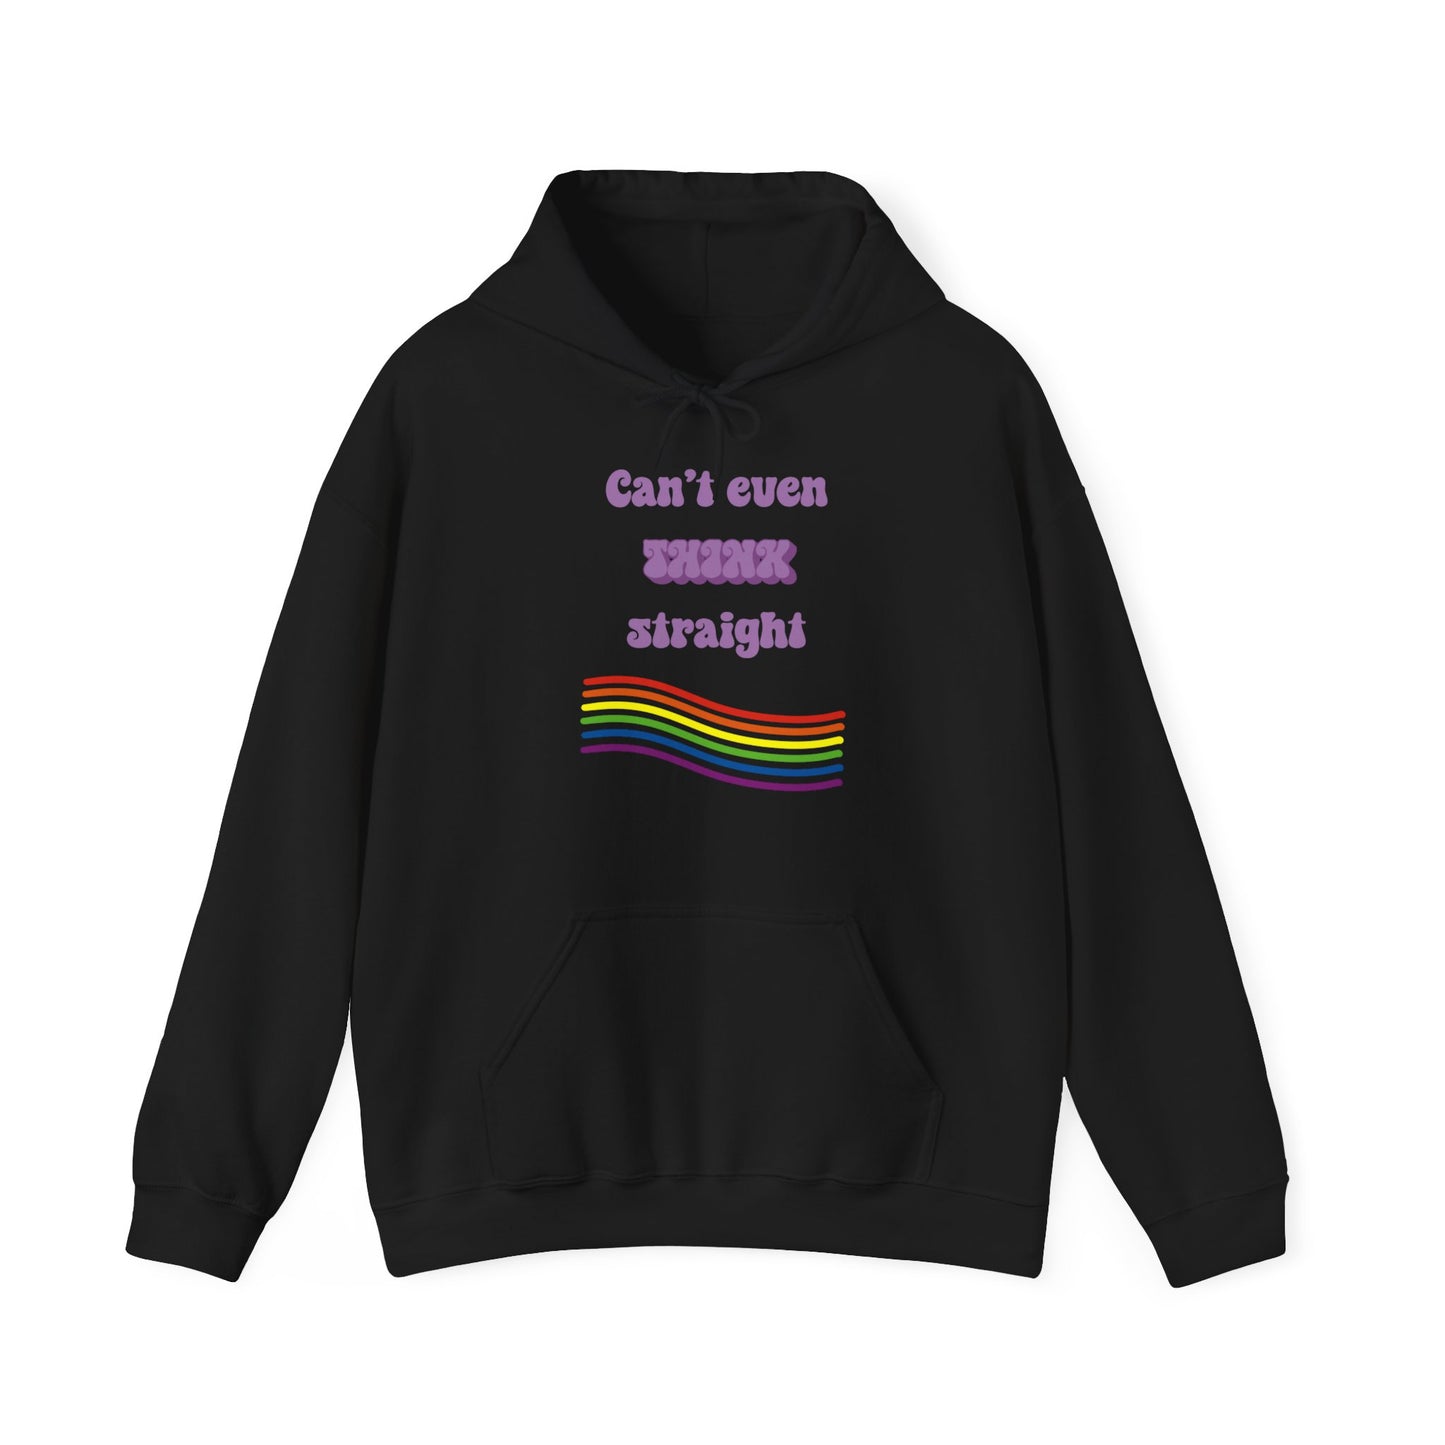 can't even think straight hoodie